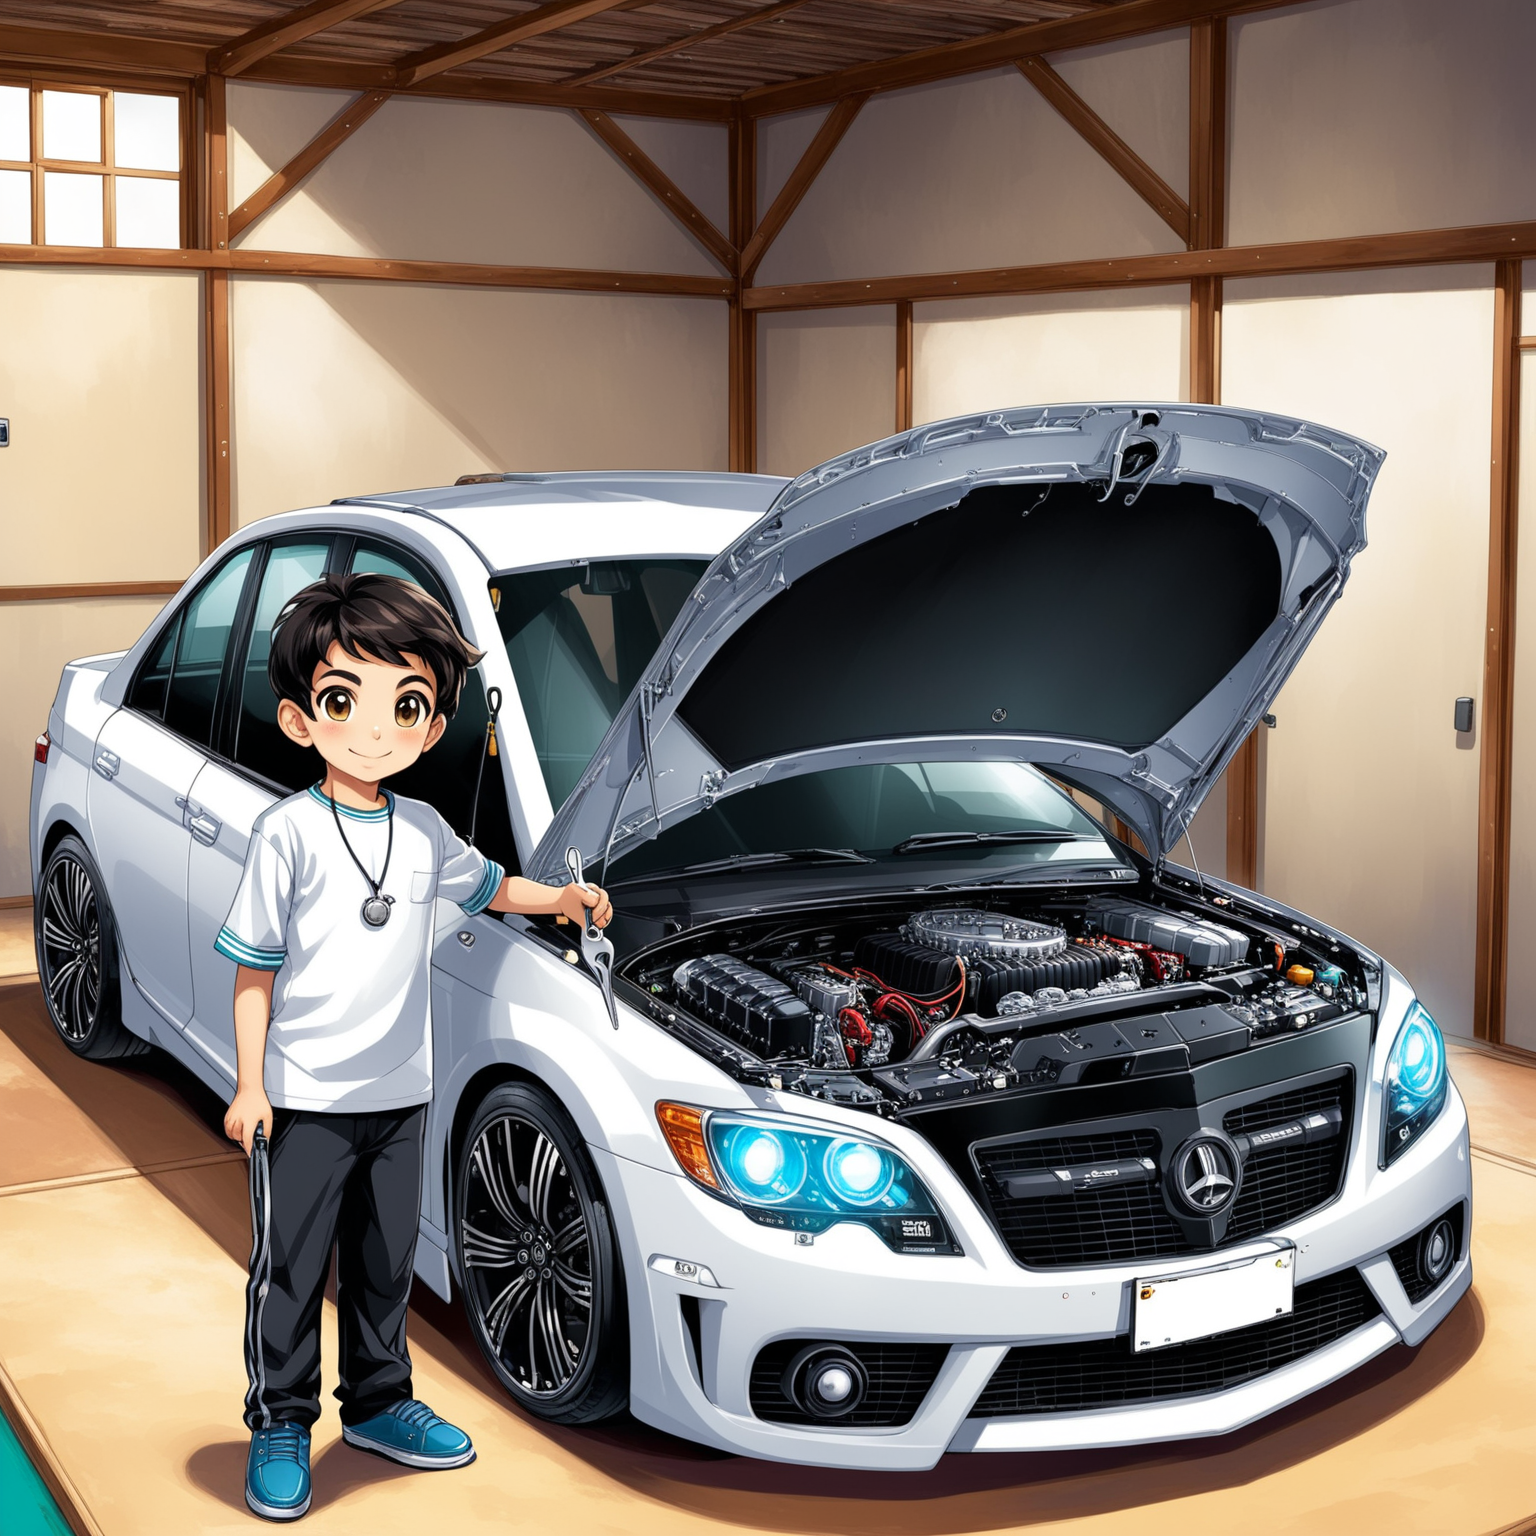 Persian Boy Working on Engine of Modern Car in HighTech Shed